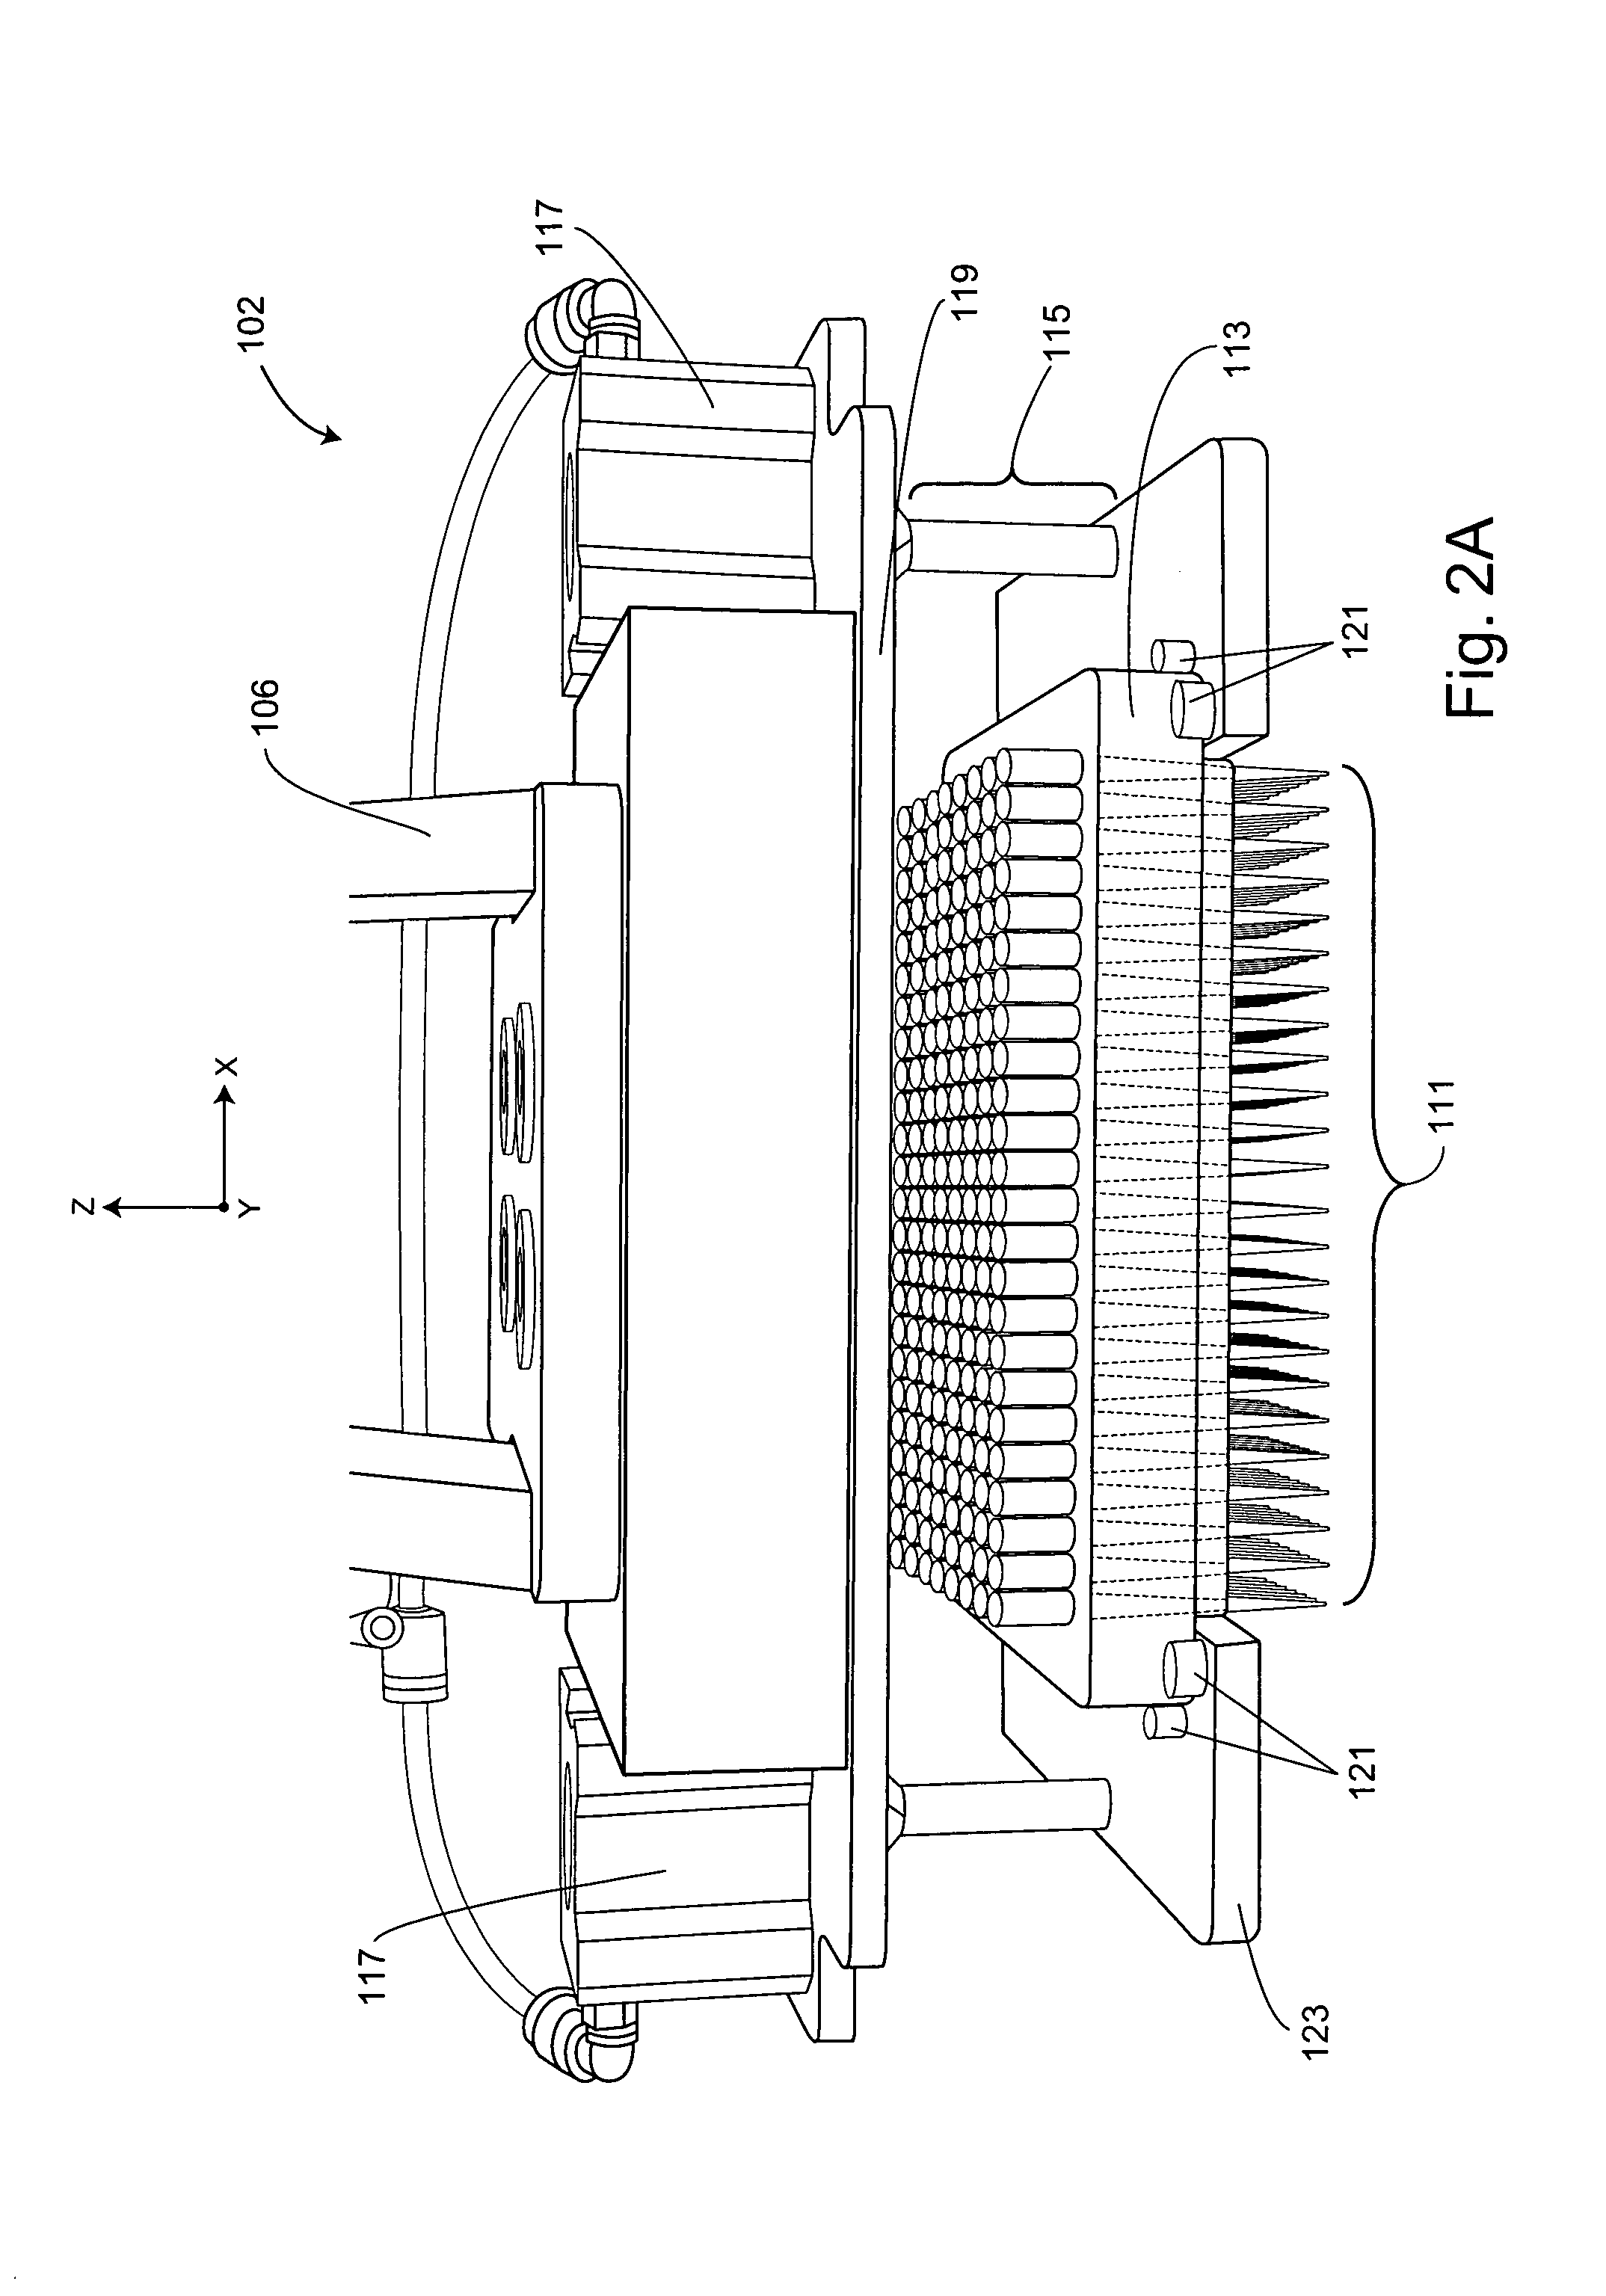 Automated cellular assaying systems and related components and methods